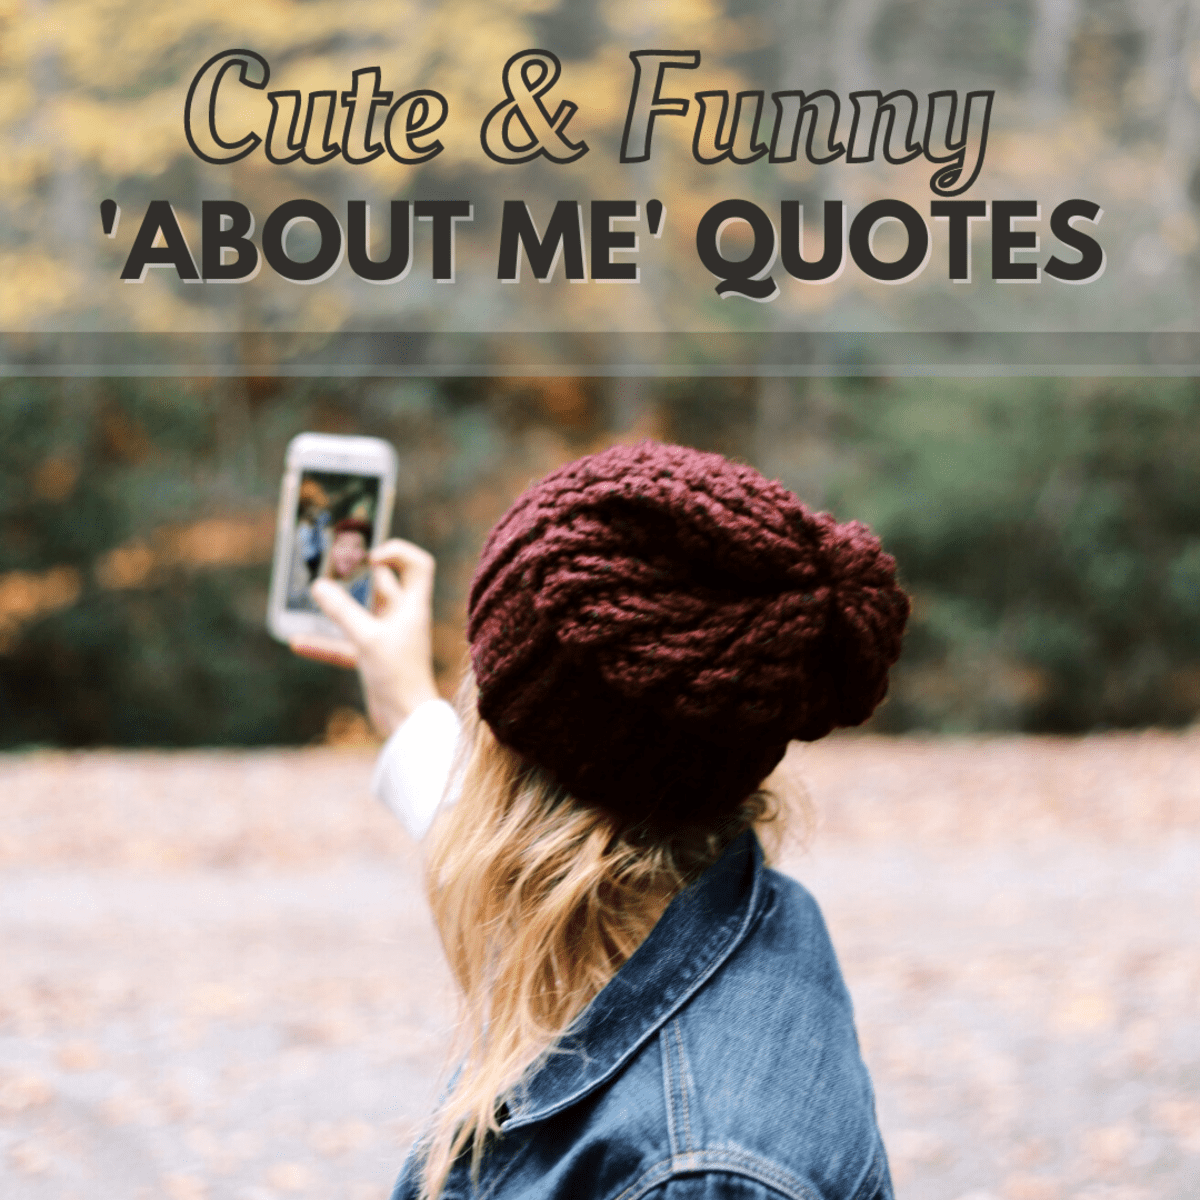 Funny Pictures, Crazy Pictures and Inspirational Words for your